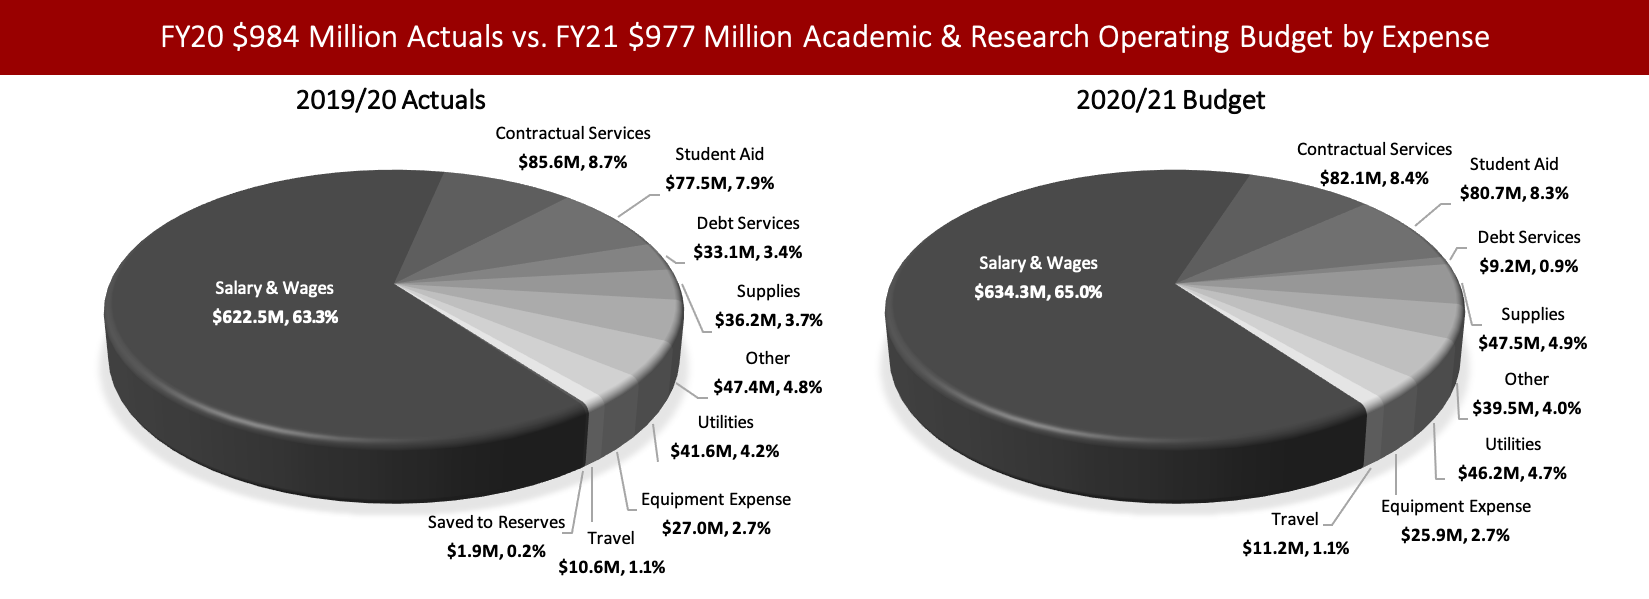 Left chart: Pie chart showing Stony Brook's 2019/20 $984 Million Academic & Research Actual Operating Expense by Expense Type  Salary & Wages: $622.5M Contractual Services: $85.6M Student Aid: $77.5M Debt Services: $33.1M Supplies: $36.2M Other: $47.4M Utilities: $41.6M Equipment Expense: $27.0M Travel: $10.6M Saved to Central Funds: $1.9M. Right Chart: Pie chart showing Stony Brook's 2020/21 $977 Million Academic & Research Operating Budget by Expense Type  Salary & Wages: $634.3M Contractual Services: $82.1M Student Aid: $80.7M Debt Services: $9.2M Supplies: $47.5M Other: $39.5M Utilities: $41.6M Equipment Expense: $25.9M Travel: $11.2M.